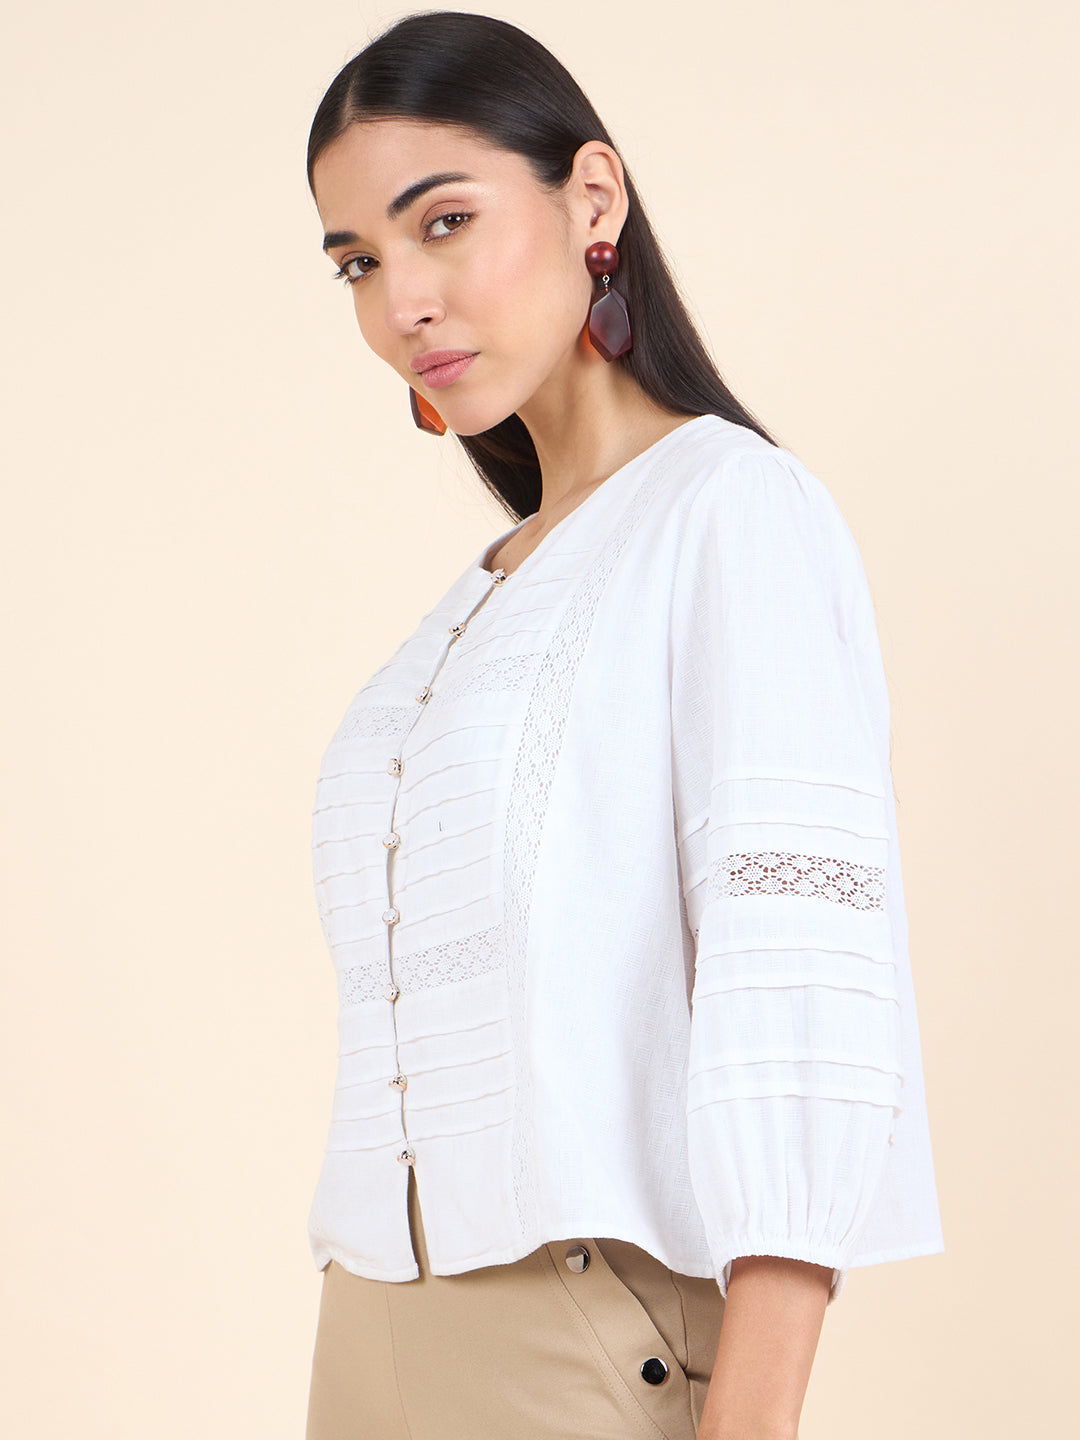 Gipsy Stylish Women Tops Summer White Collection